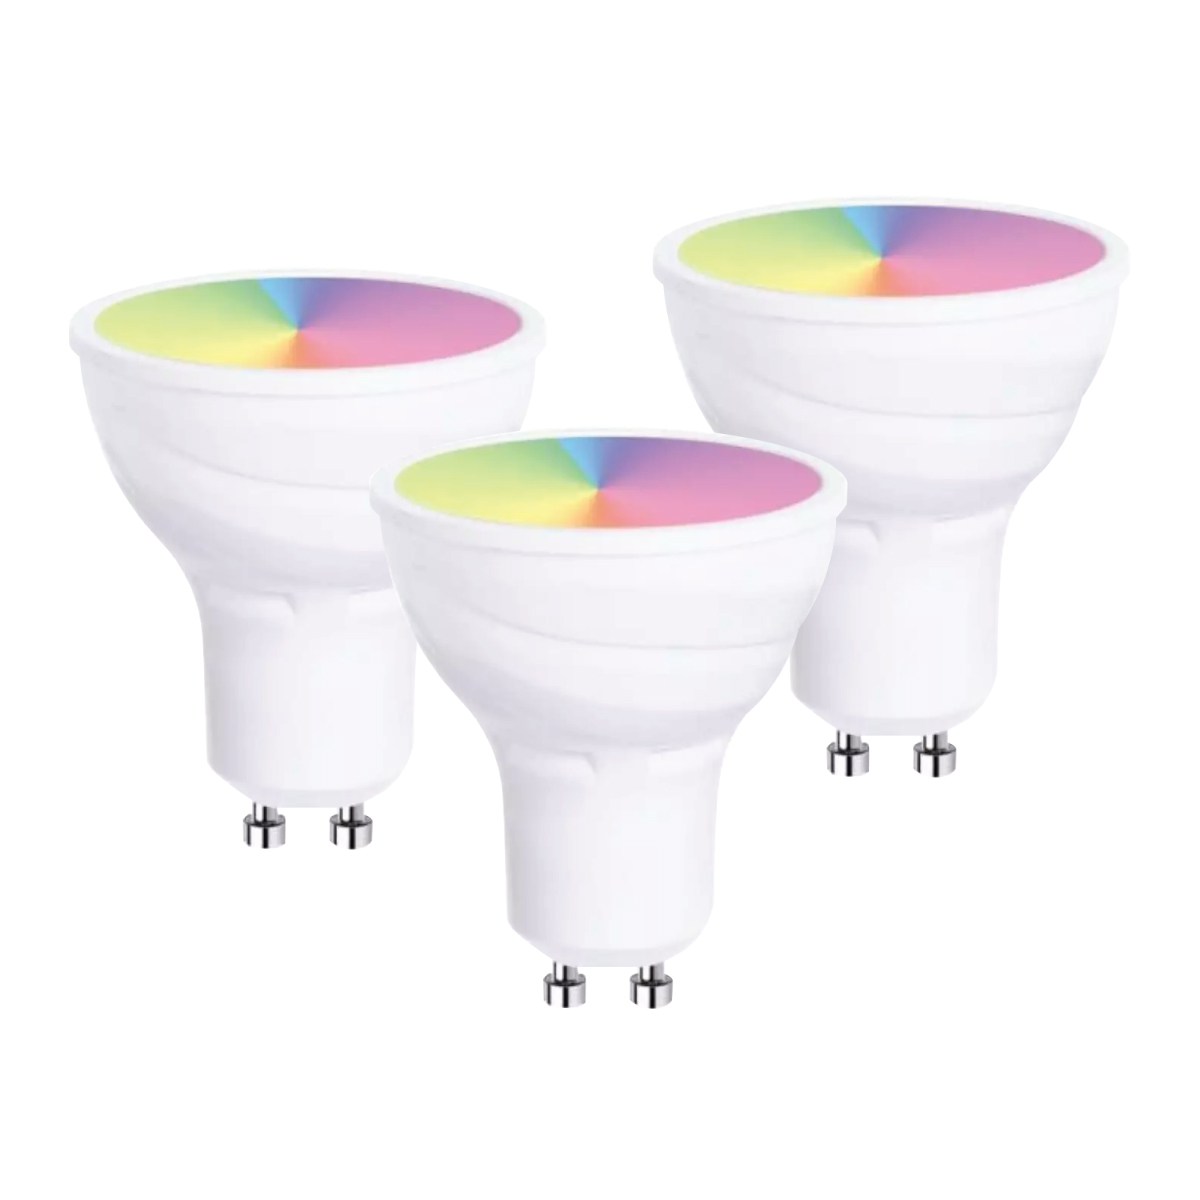 View Pack of 3 Smart RGB W GU10 Bulb Colour Changing information